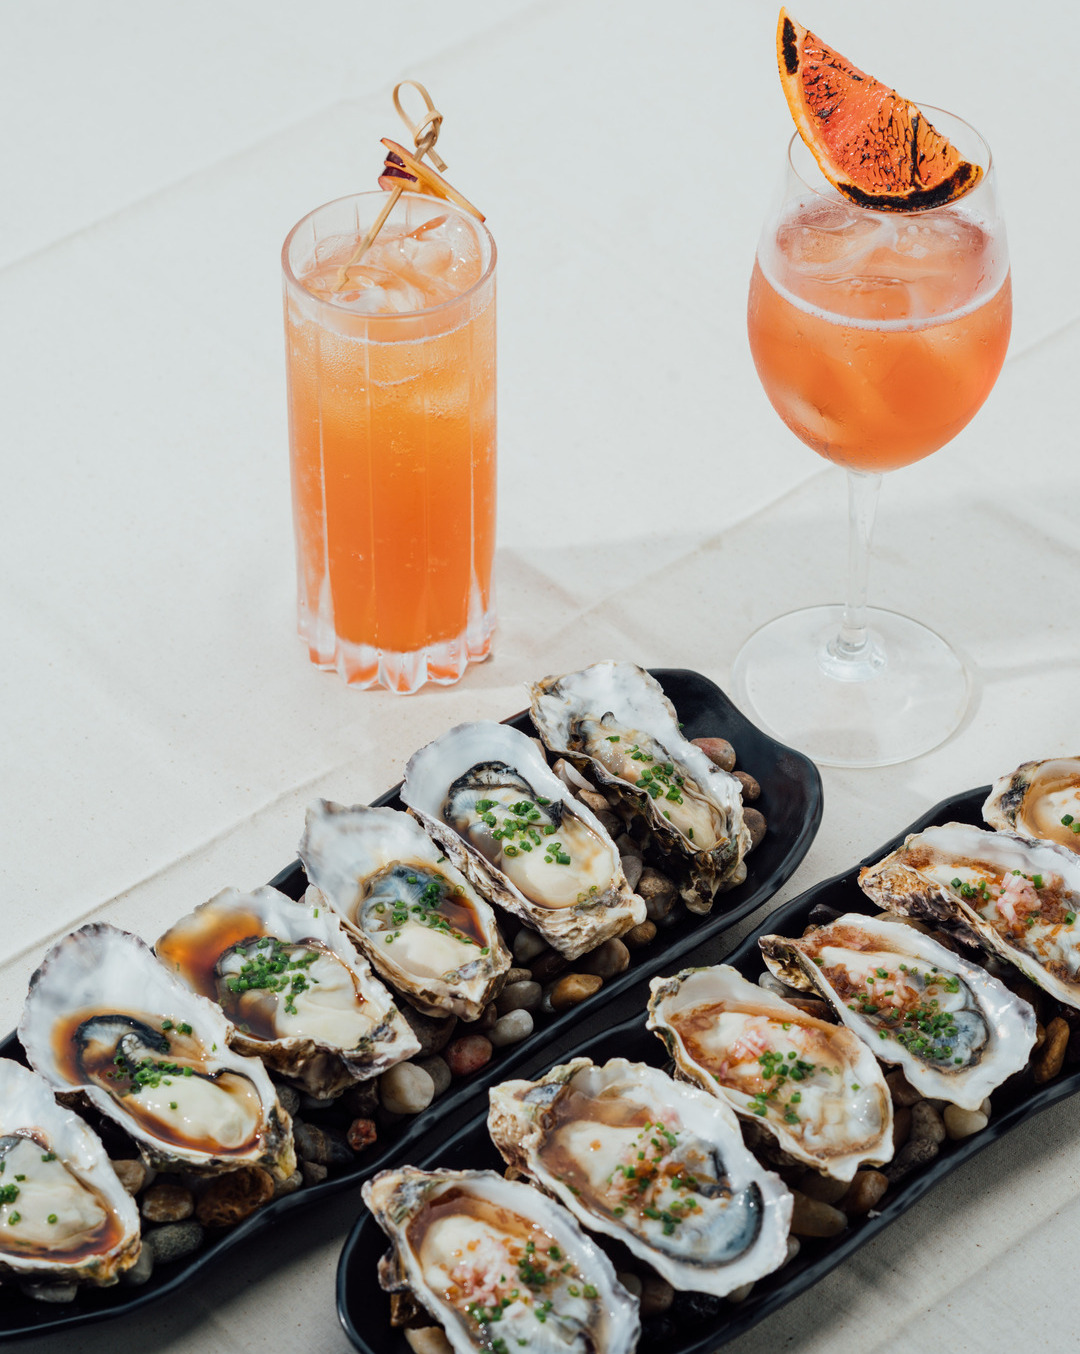 Cocktails and oysters from Southbridge